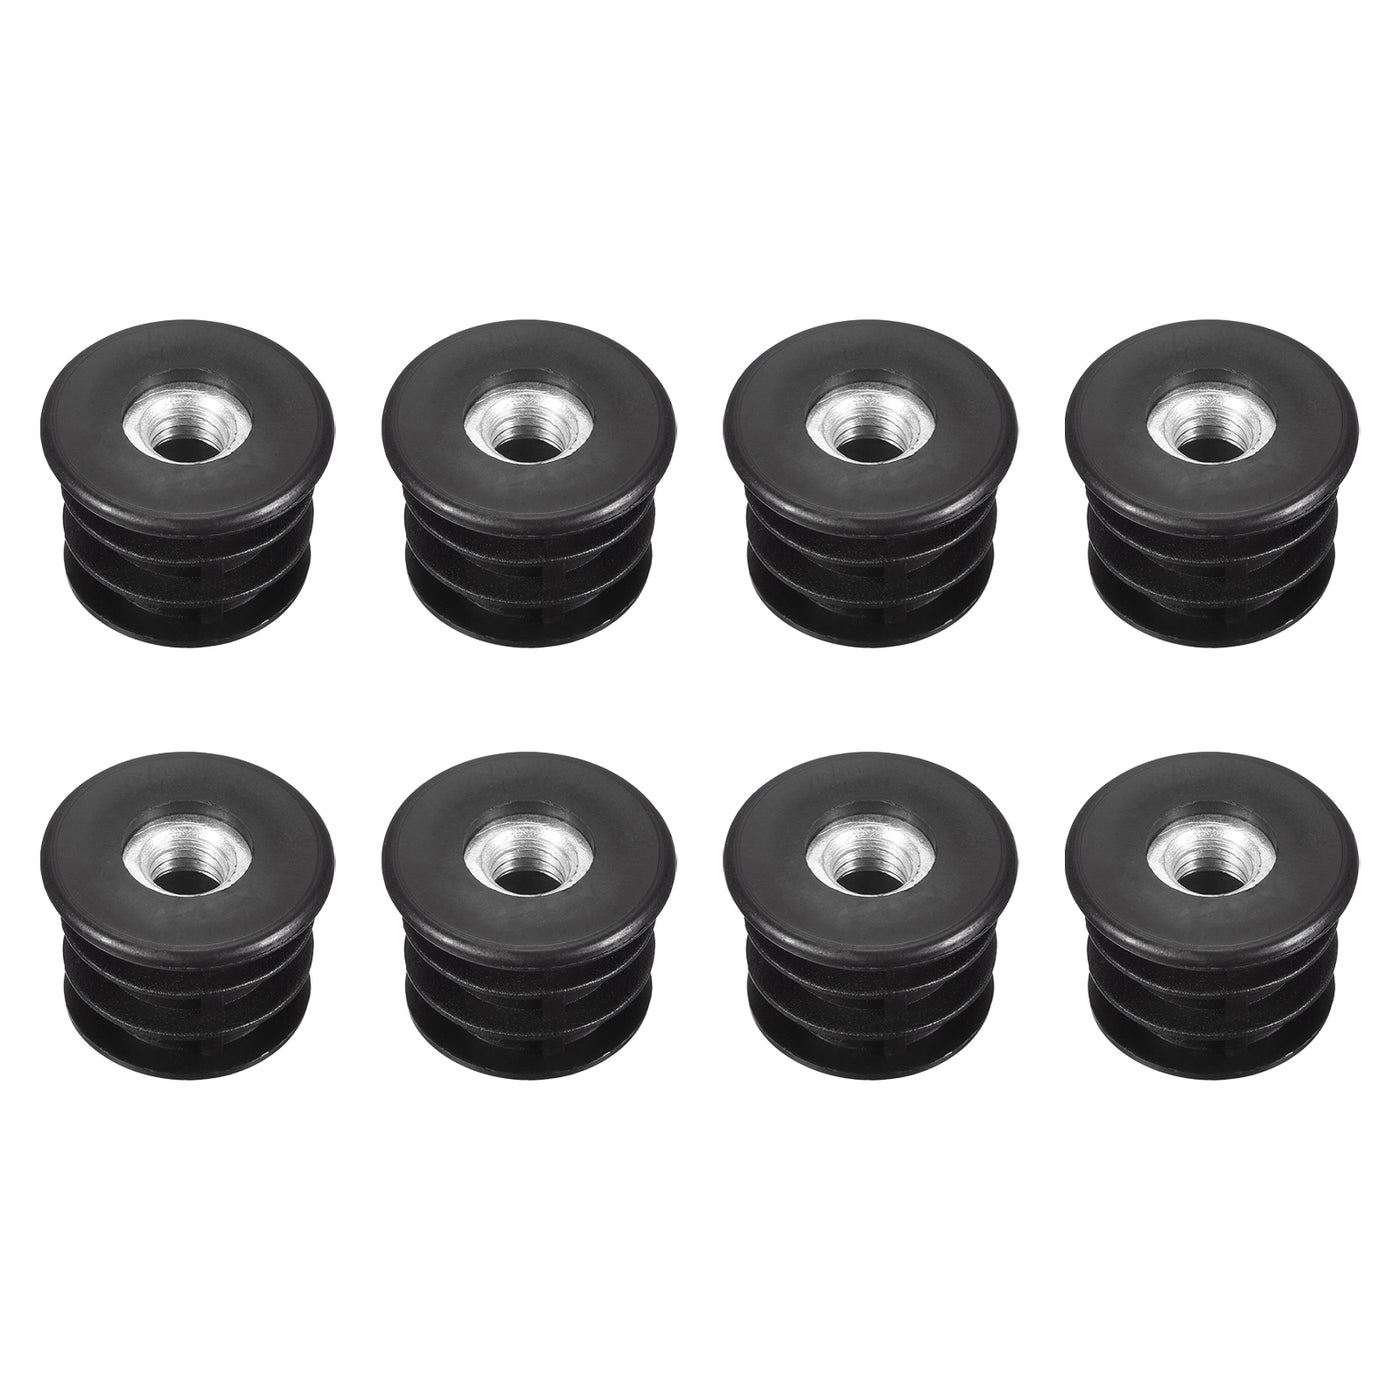 uxcell Uxcell 8Pcs Caster Insert with Thread, 25mm/0.98" M8 Thread for Furniture